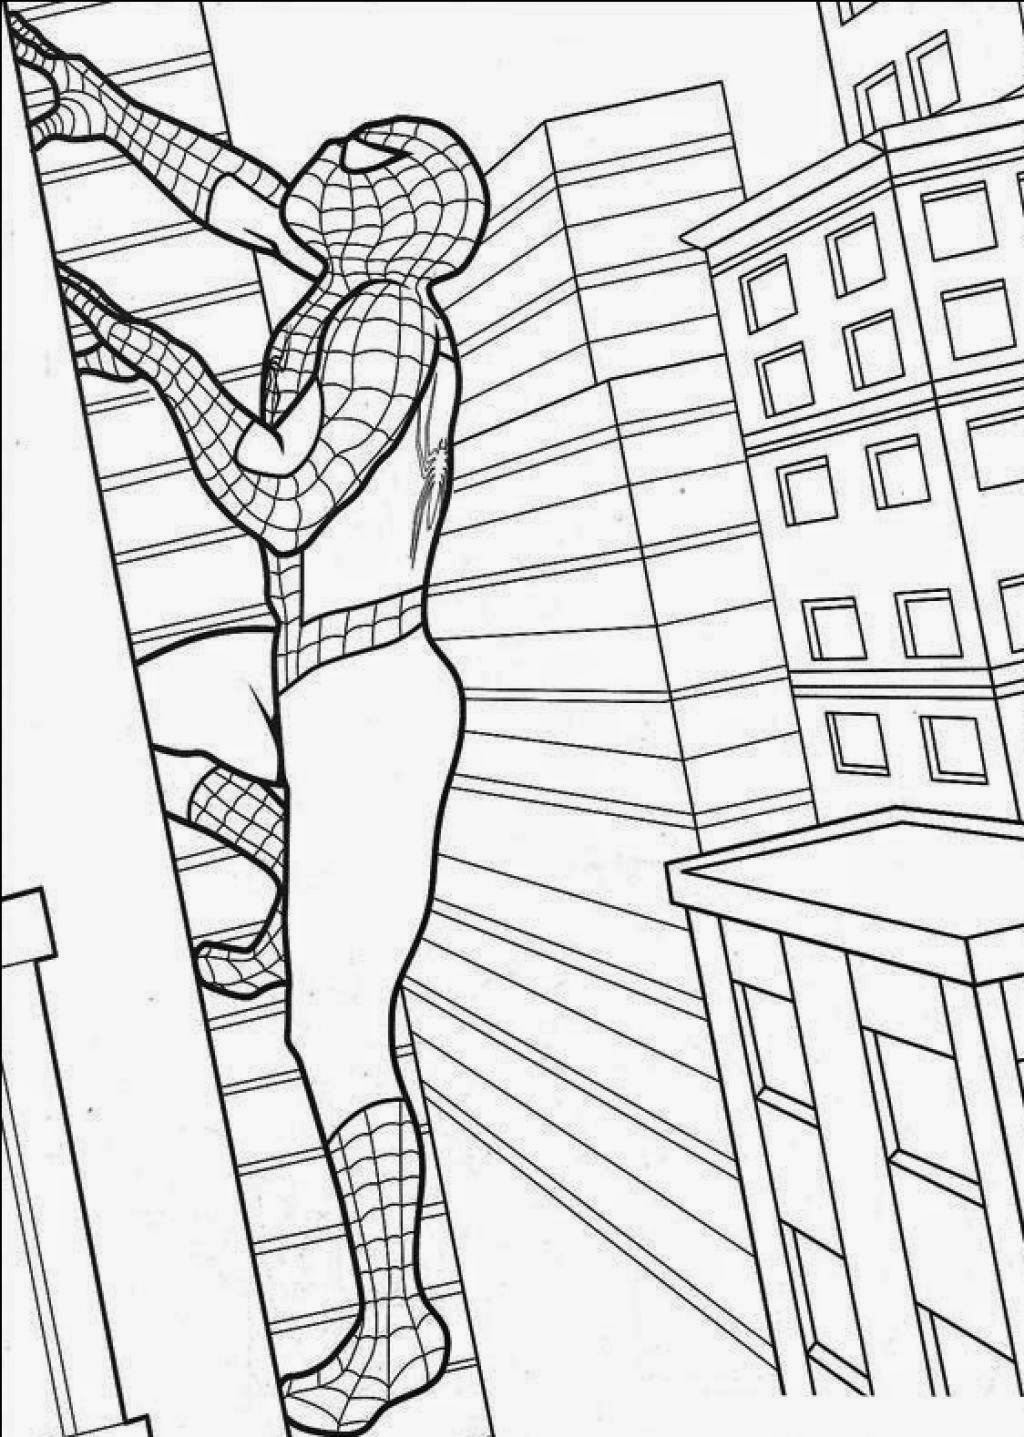 Coloring Pages Spiderman Free Printable Coloring Pages